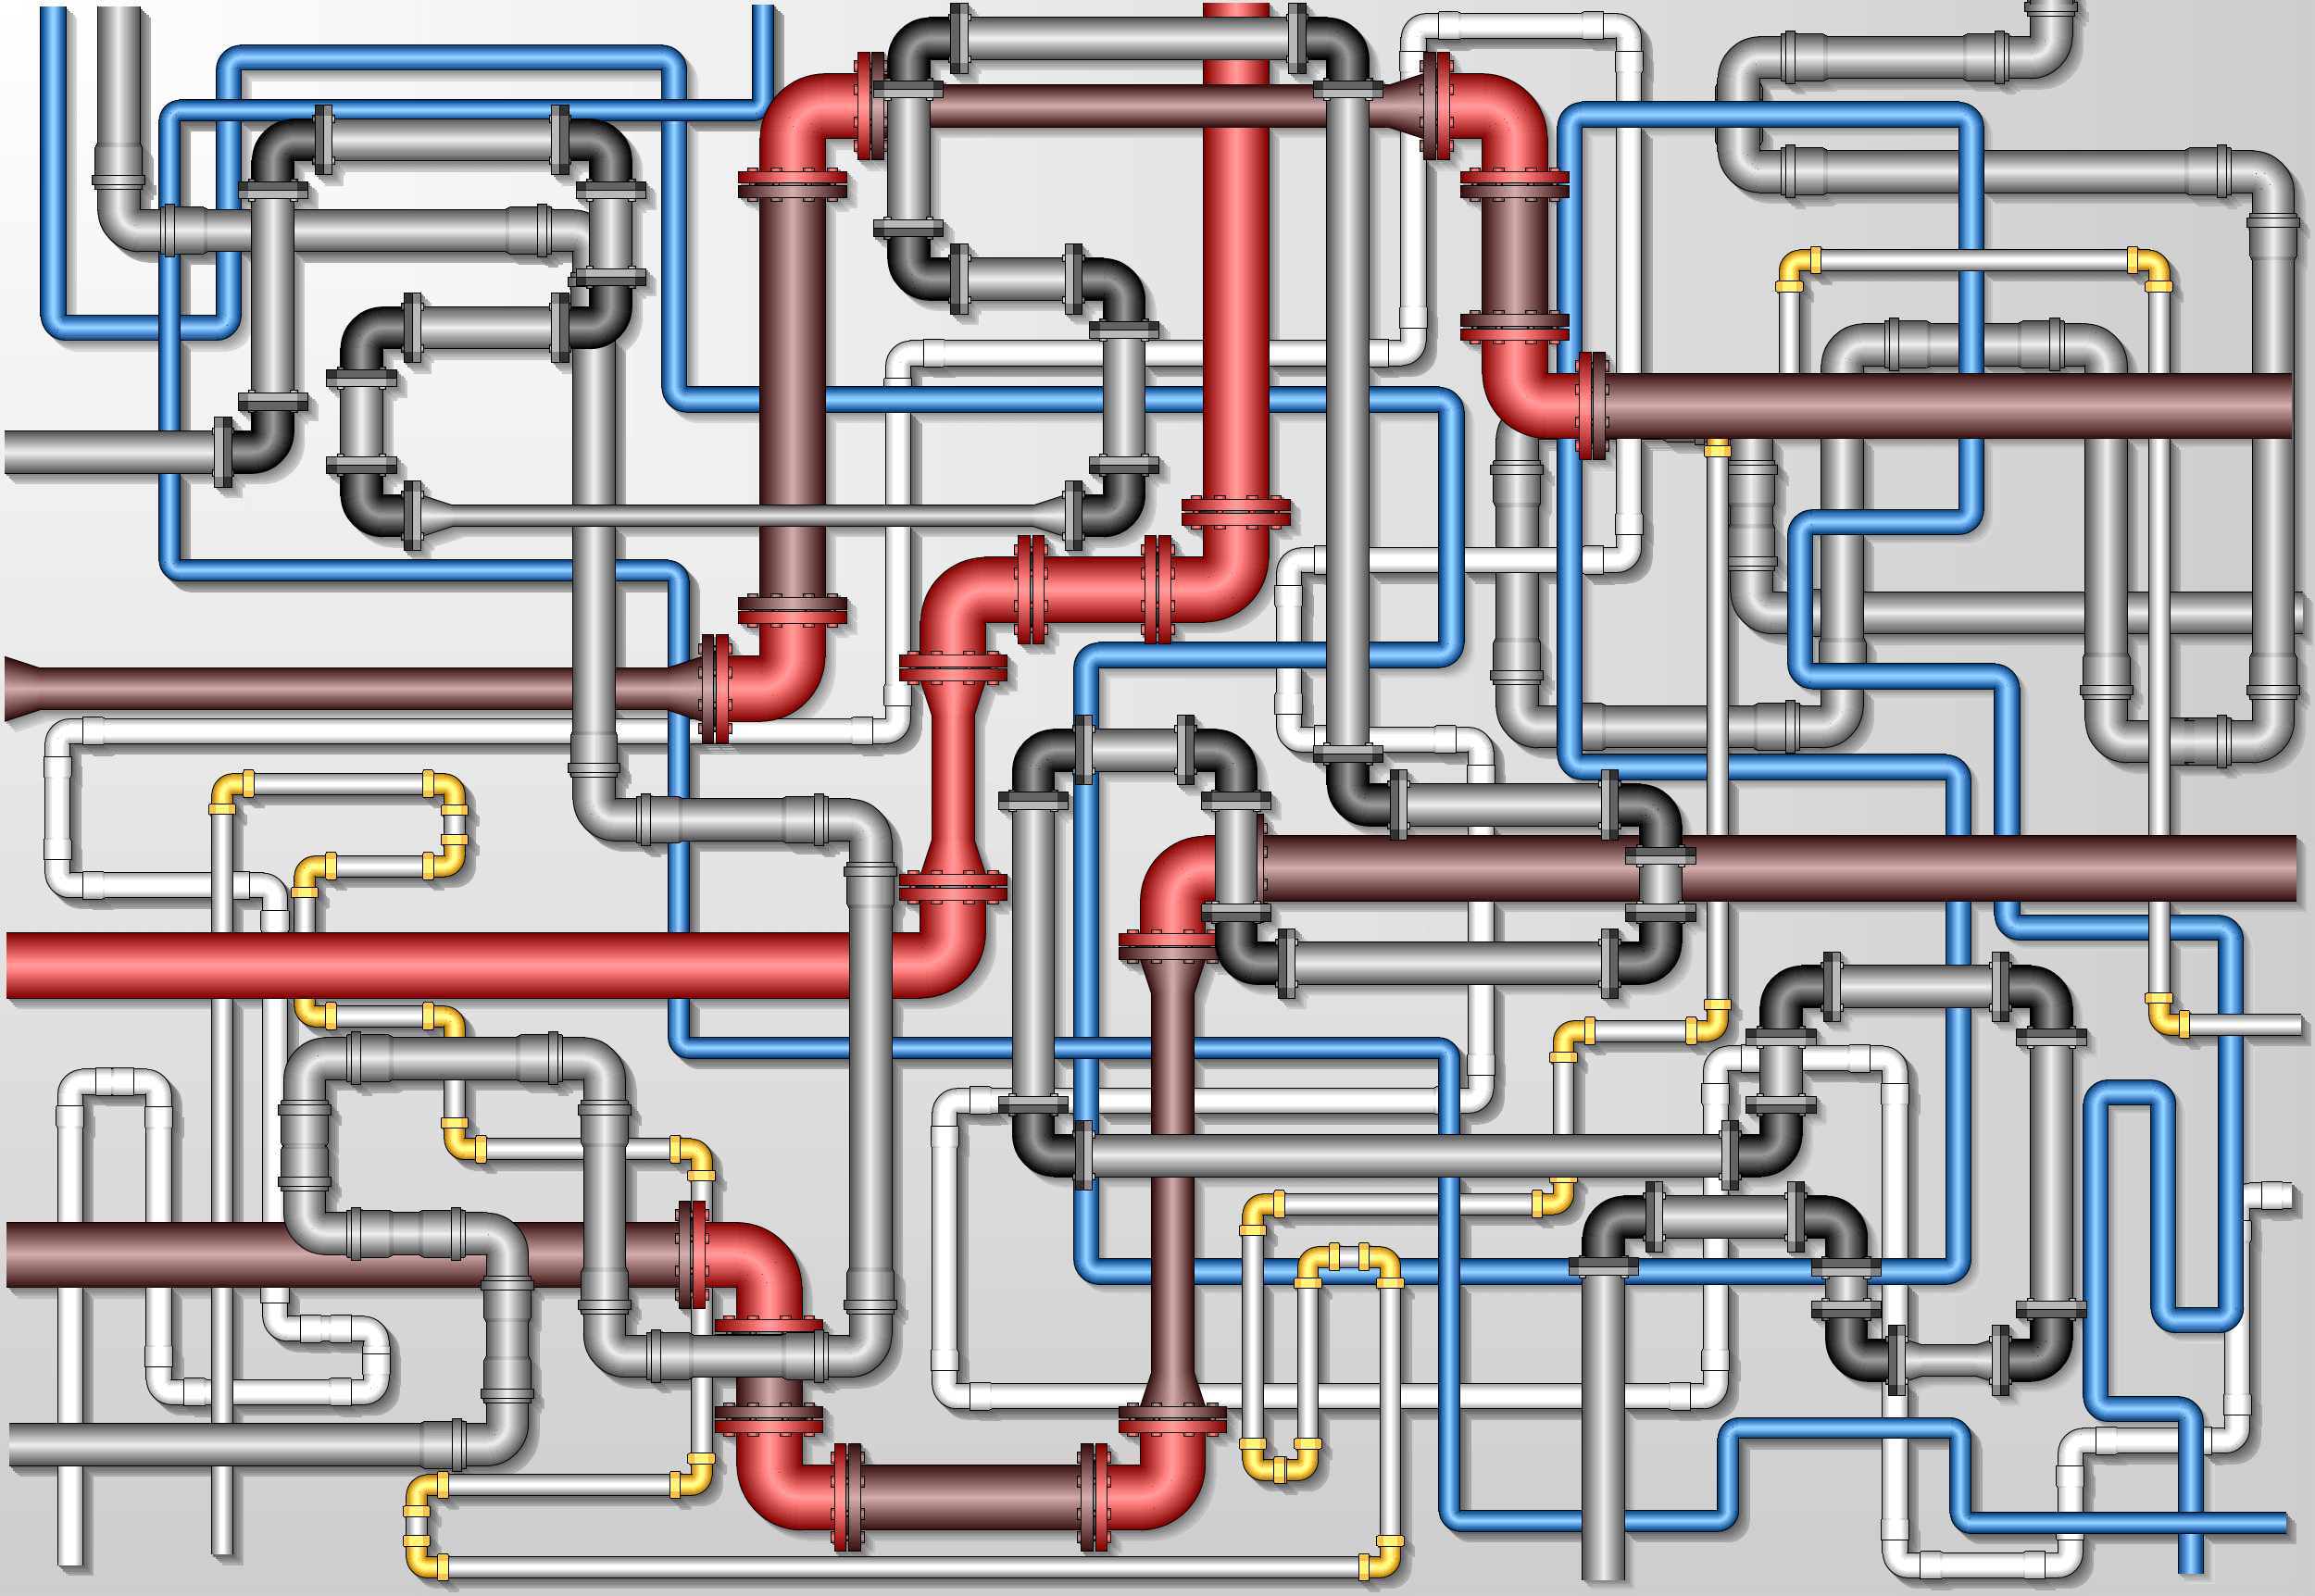 interweaving network of pipes